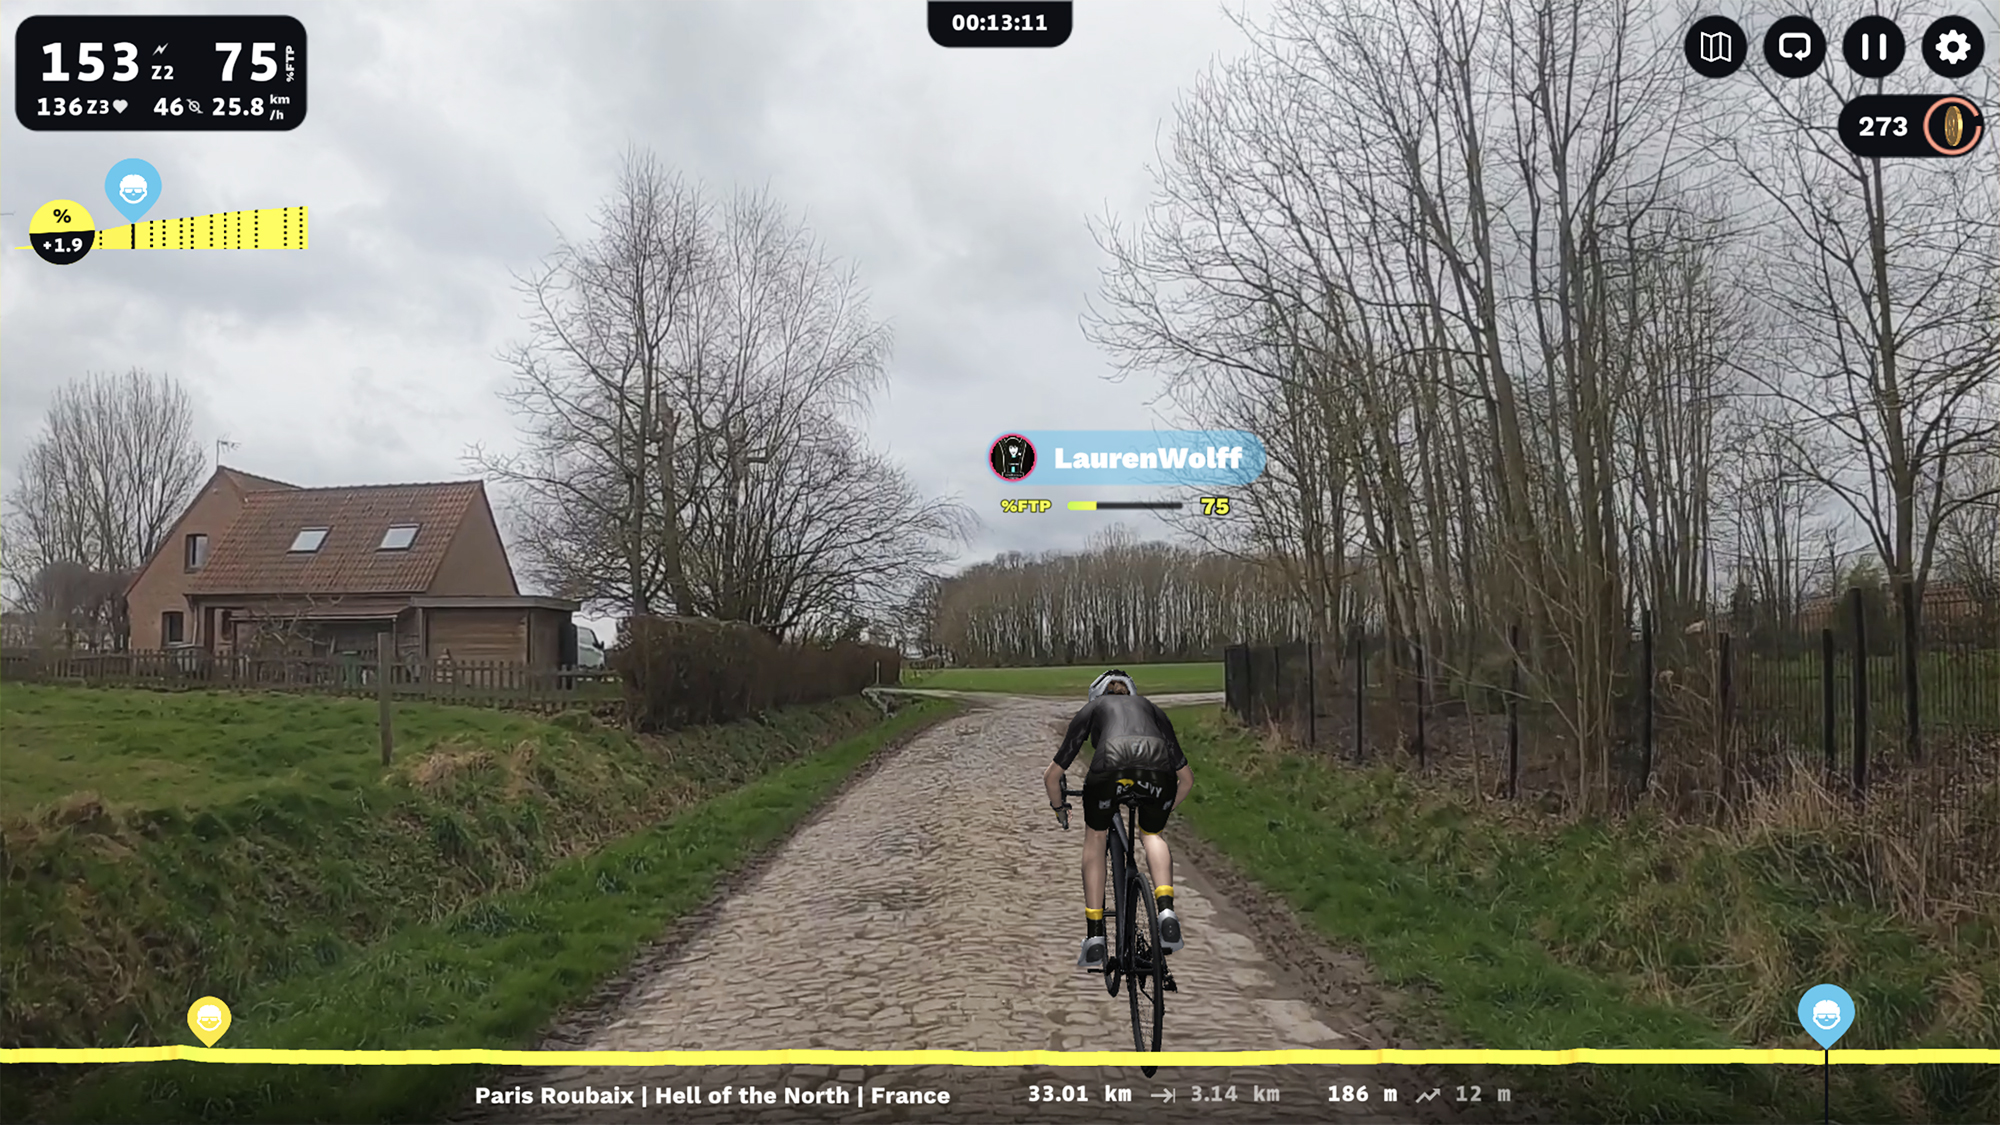 Ride a segment on ROUVY through rural countryside in the Paris Roubaix route